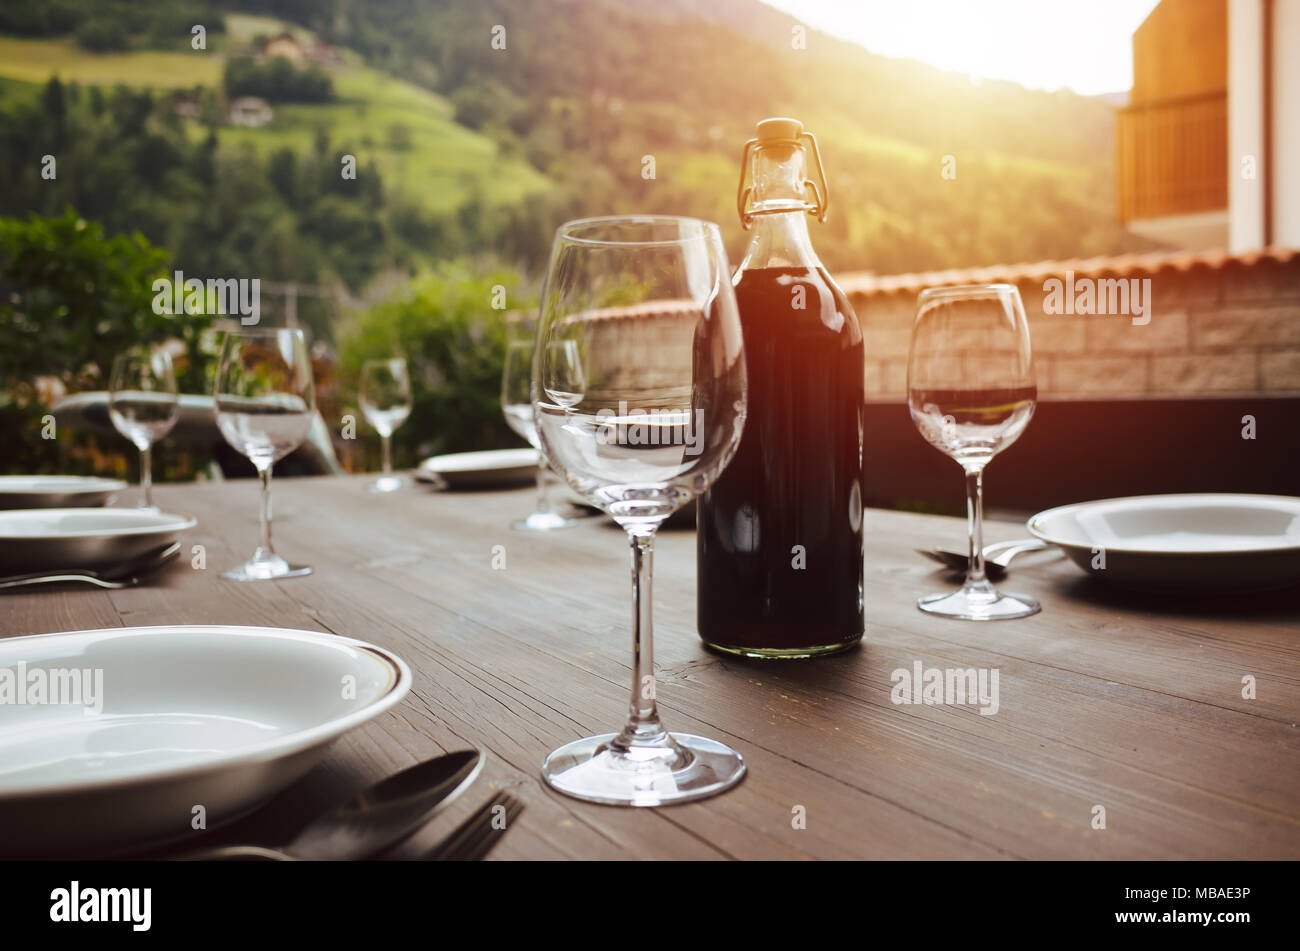 bottle of wine and wine glasses on a table outdoors during sunset Stock Photo